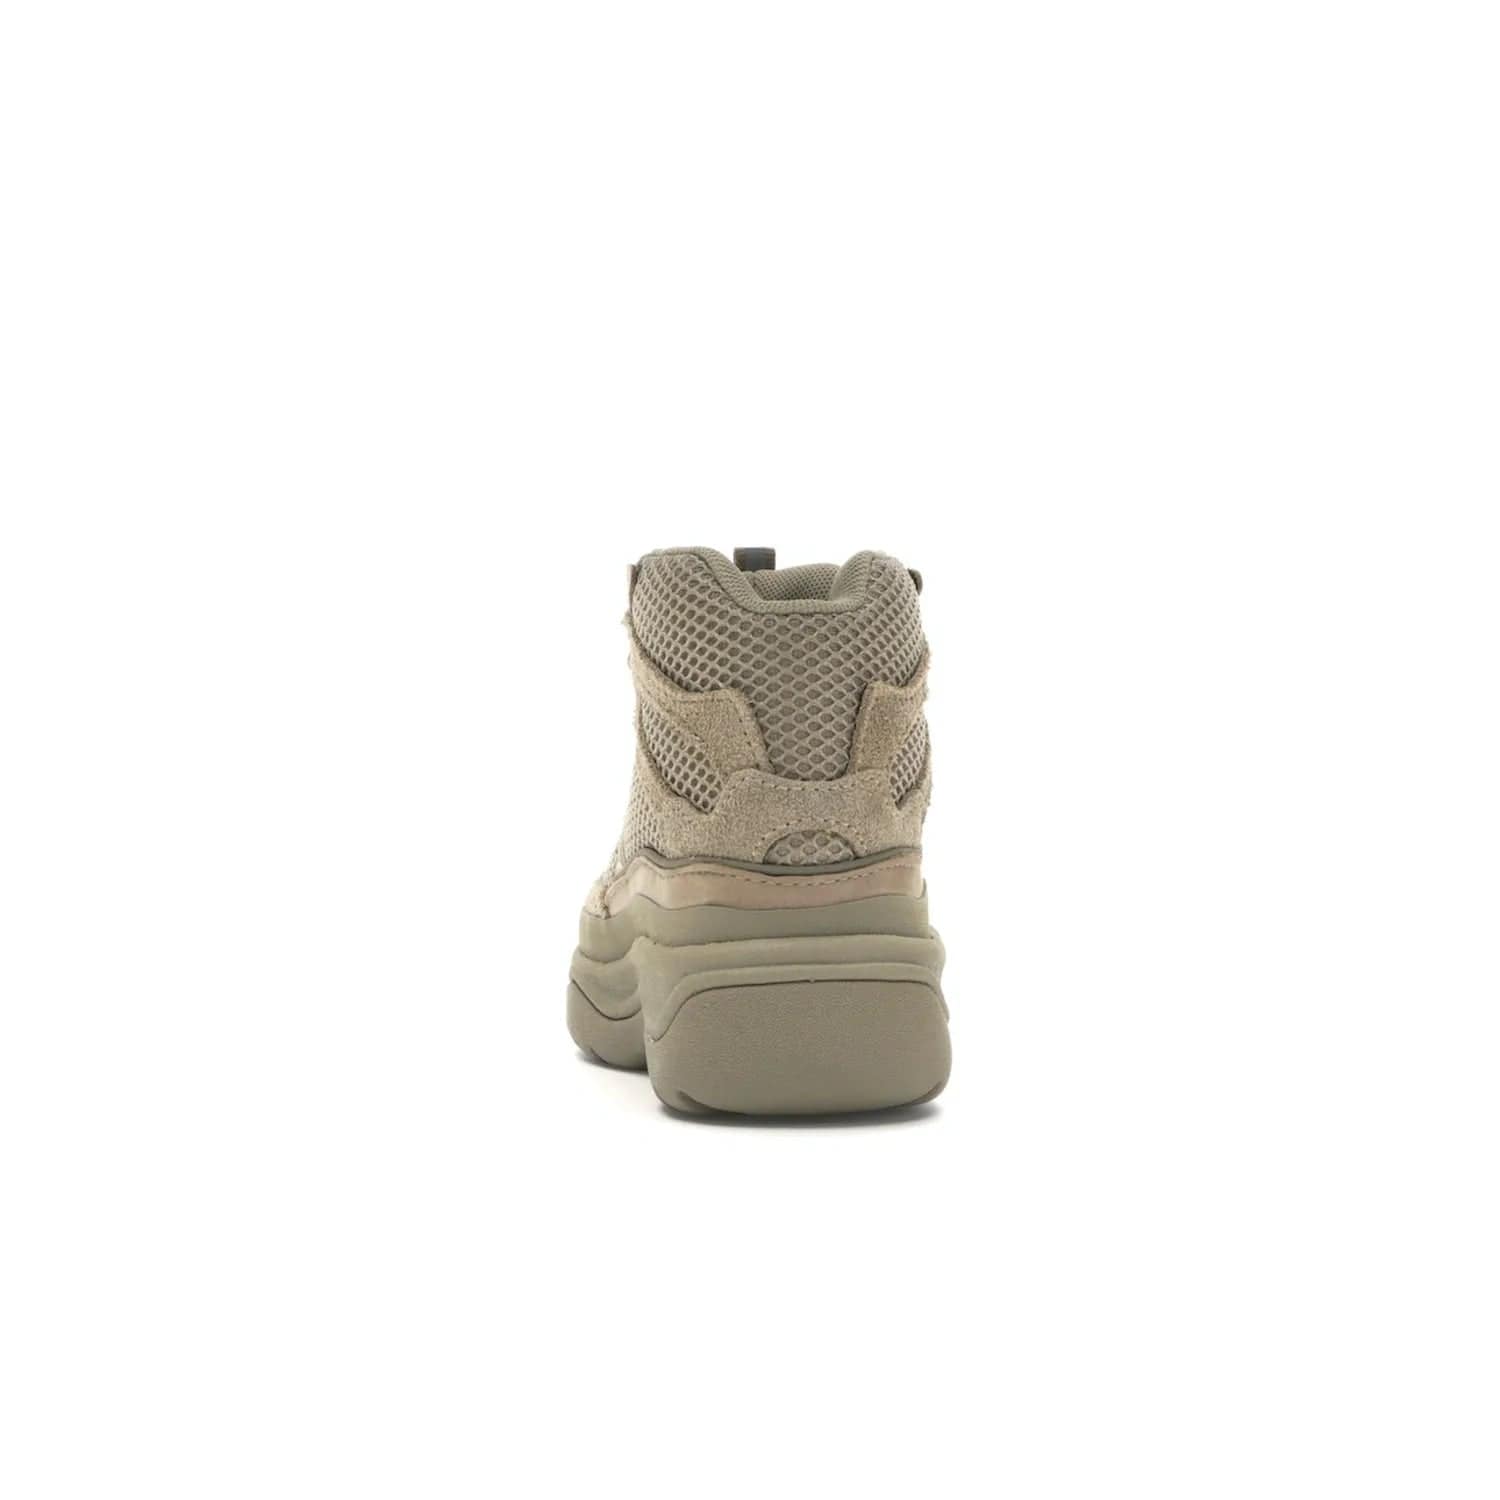 adidas Yeezy Desert Boot Rock (Kids) - Image 27 - Only at www.BallersClubKickz.com - Elevate your style this season with the adidas Yeezy Desert Boot Rock. Crafted from layered nylon and suede, this chic kids' silhouette features an EVA midsole and rubber outsole for superior cushioning and traction.